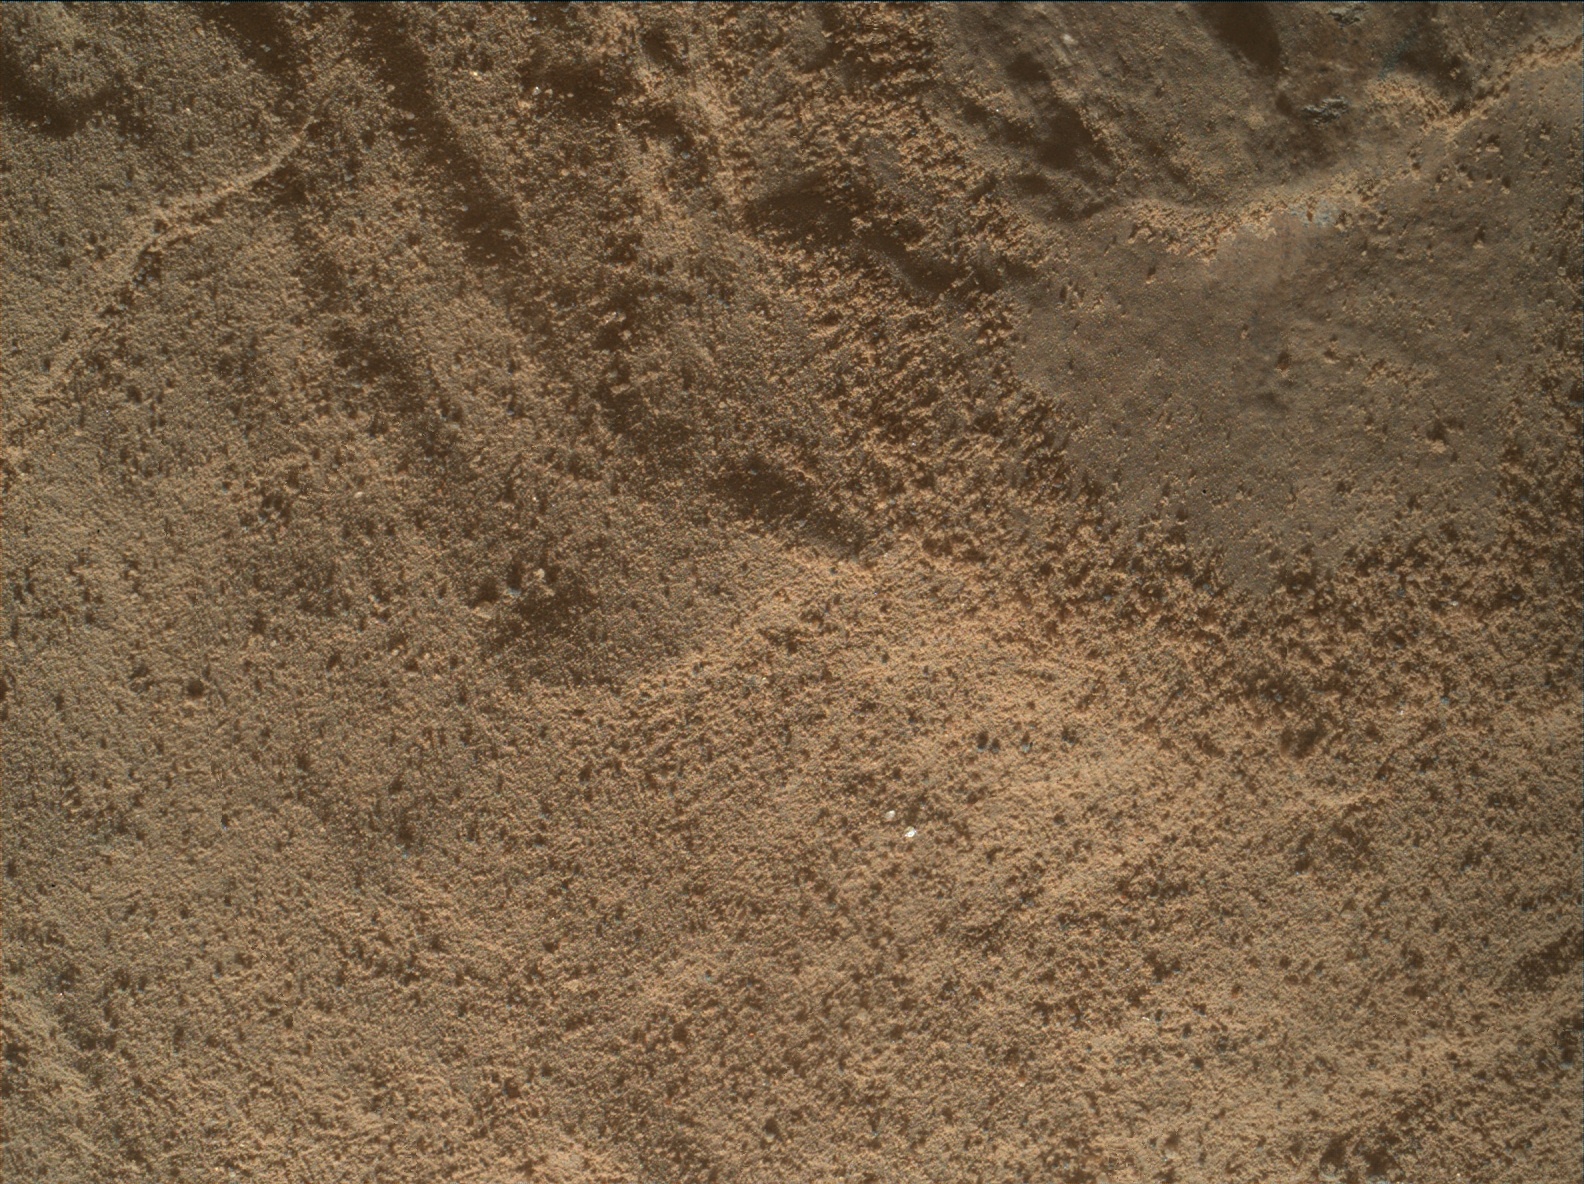 Nasa's Mars rover Curiosity acquired this image using its Mars Hand Lens Imager (MAHLI) on Sol 2602